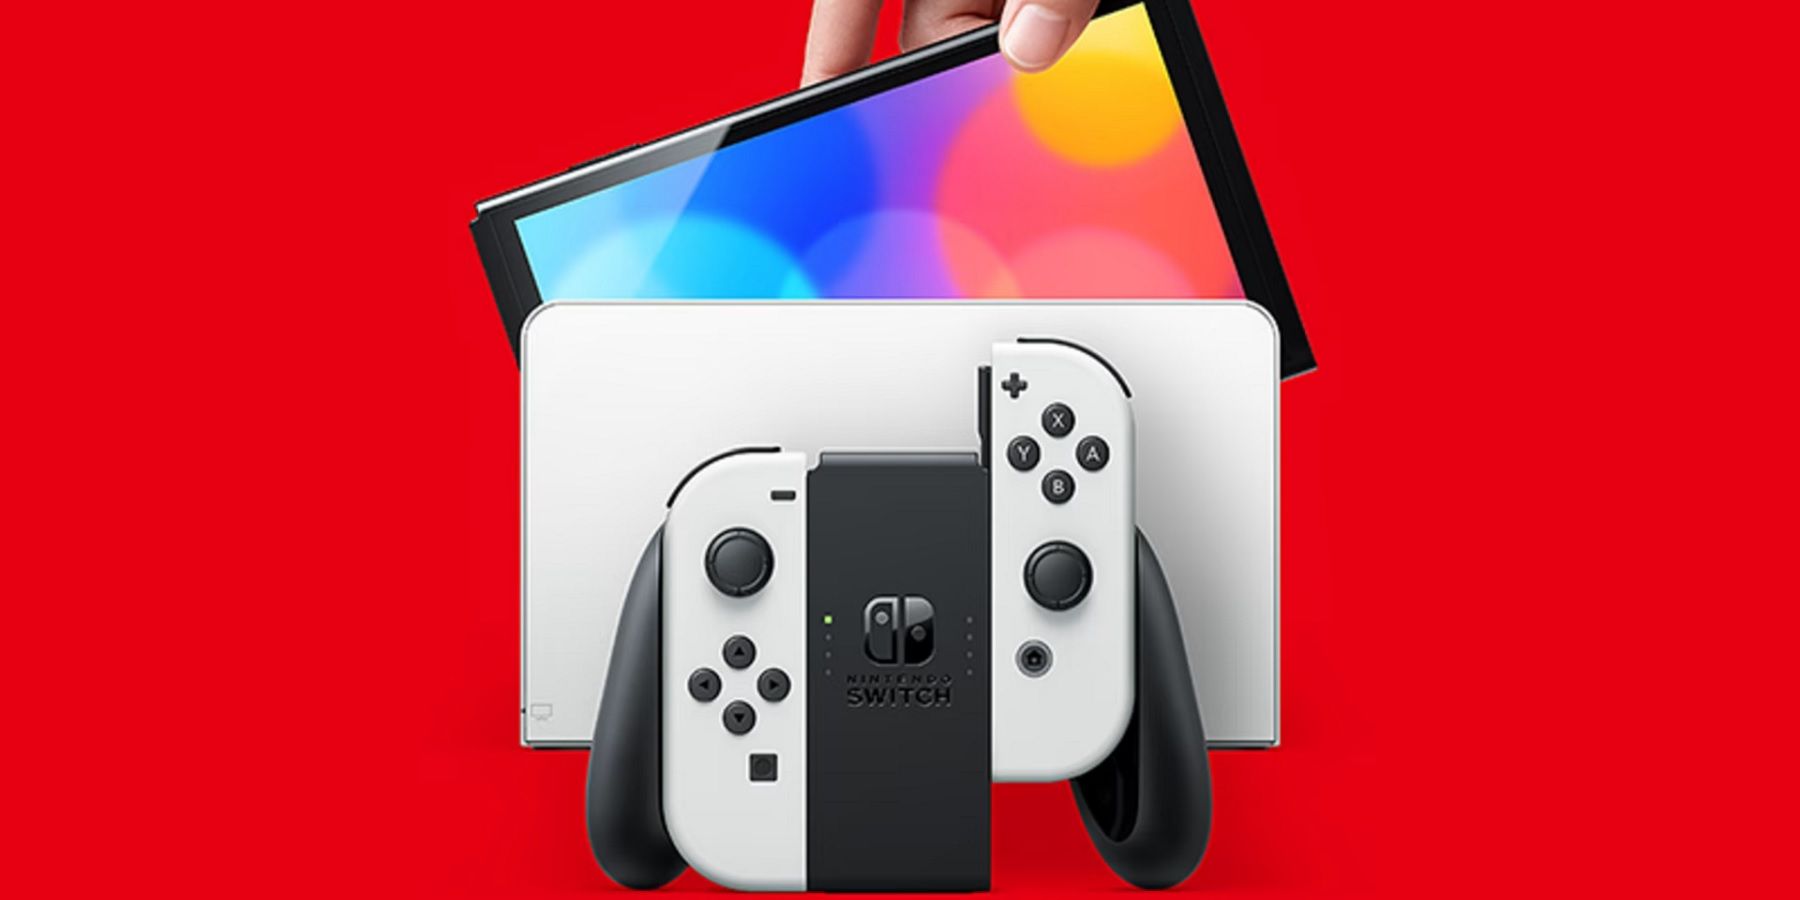 March 2022 is Going to Be Huge for Nintendo Switch Gamers